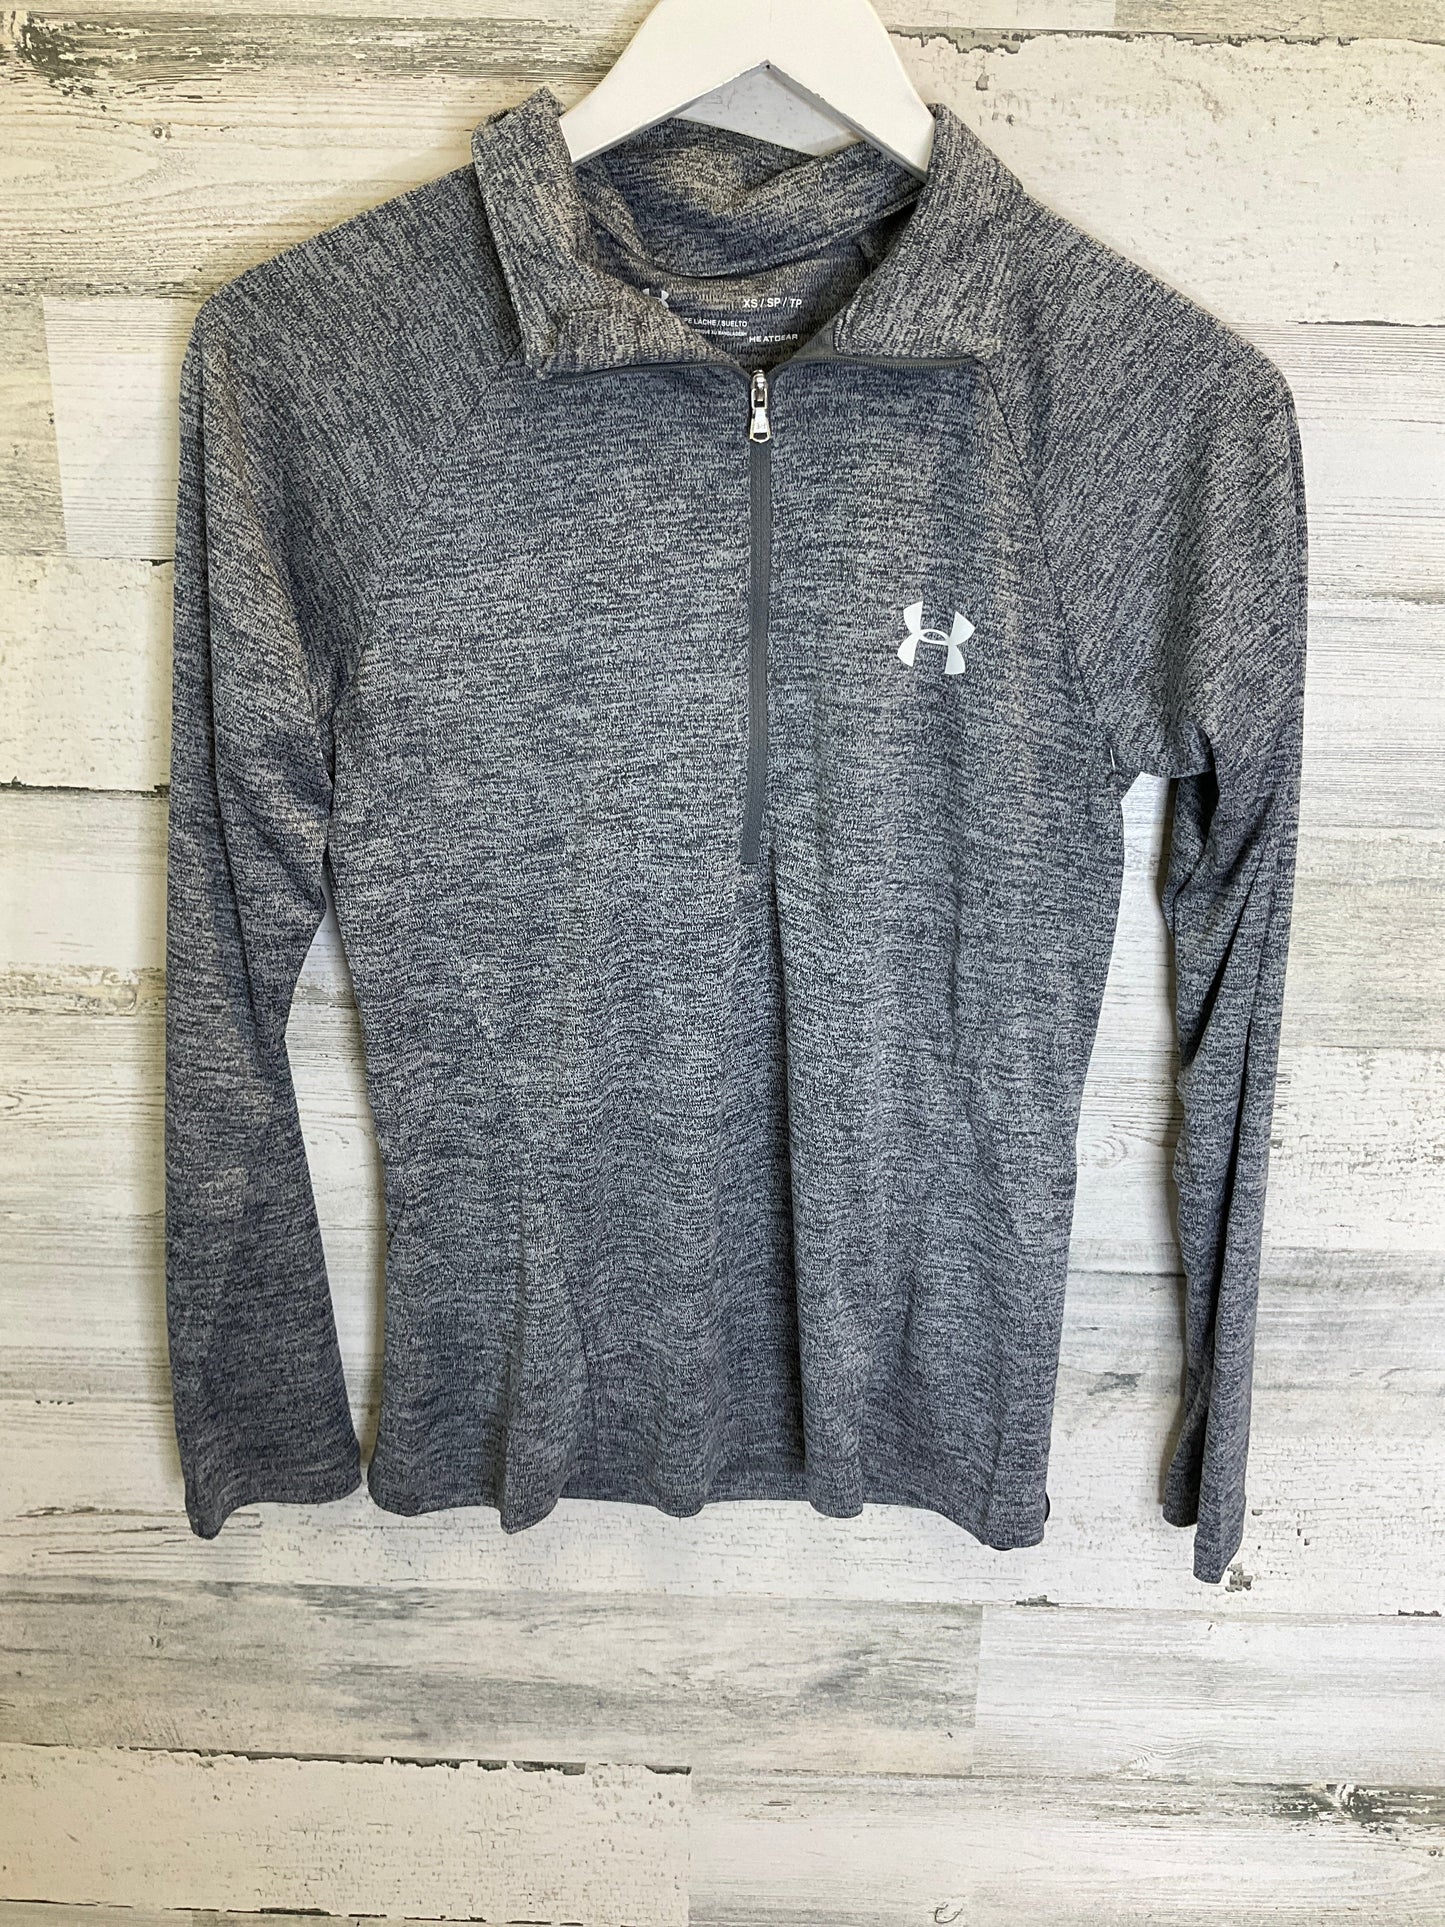 Grey Athletic Top Long Sleeve Collar Under Armour, Size Xs